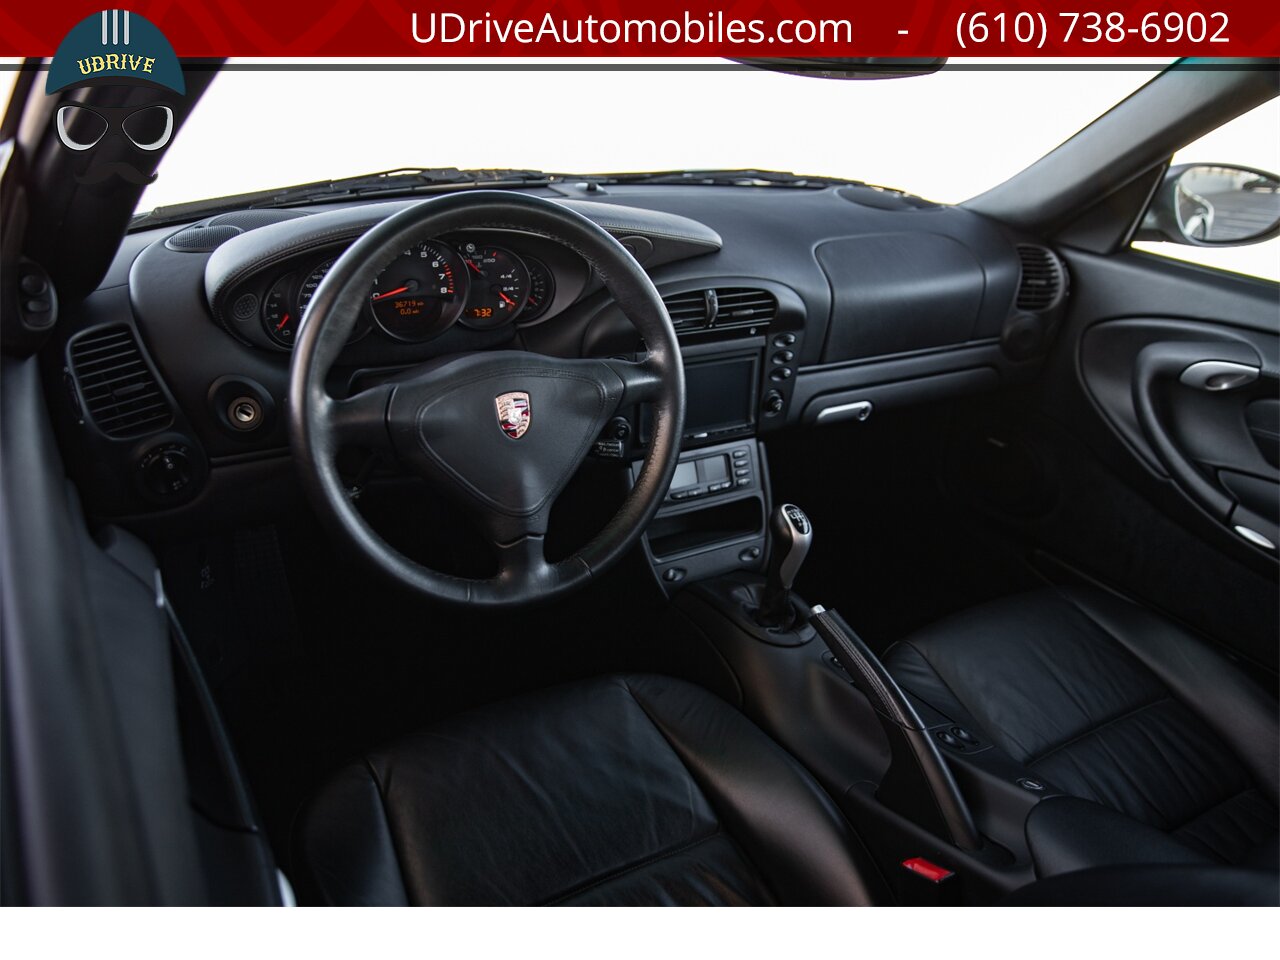 2003 Porsche 911 996 Turbo X50 Power Kit 6 Speed Seal Grey  over Black Leather - Photo 6 - West Chester, PA 19382